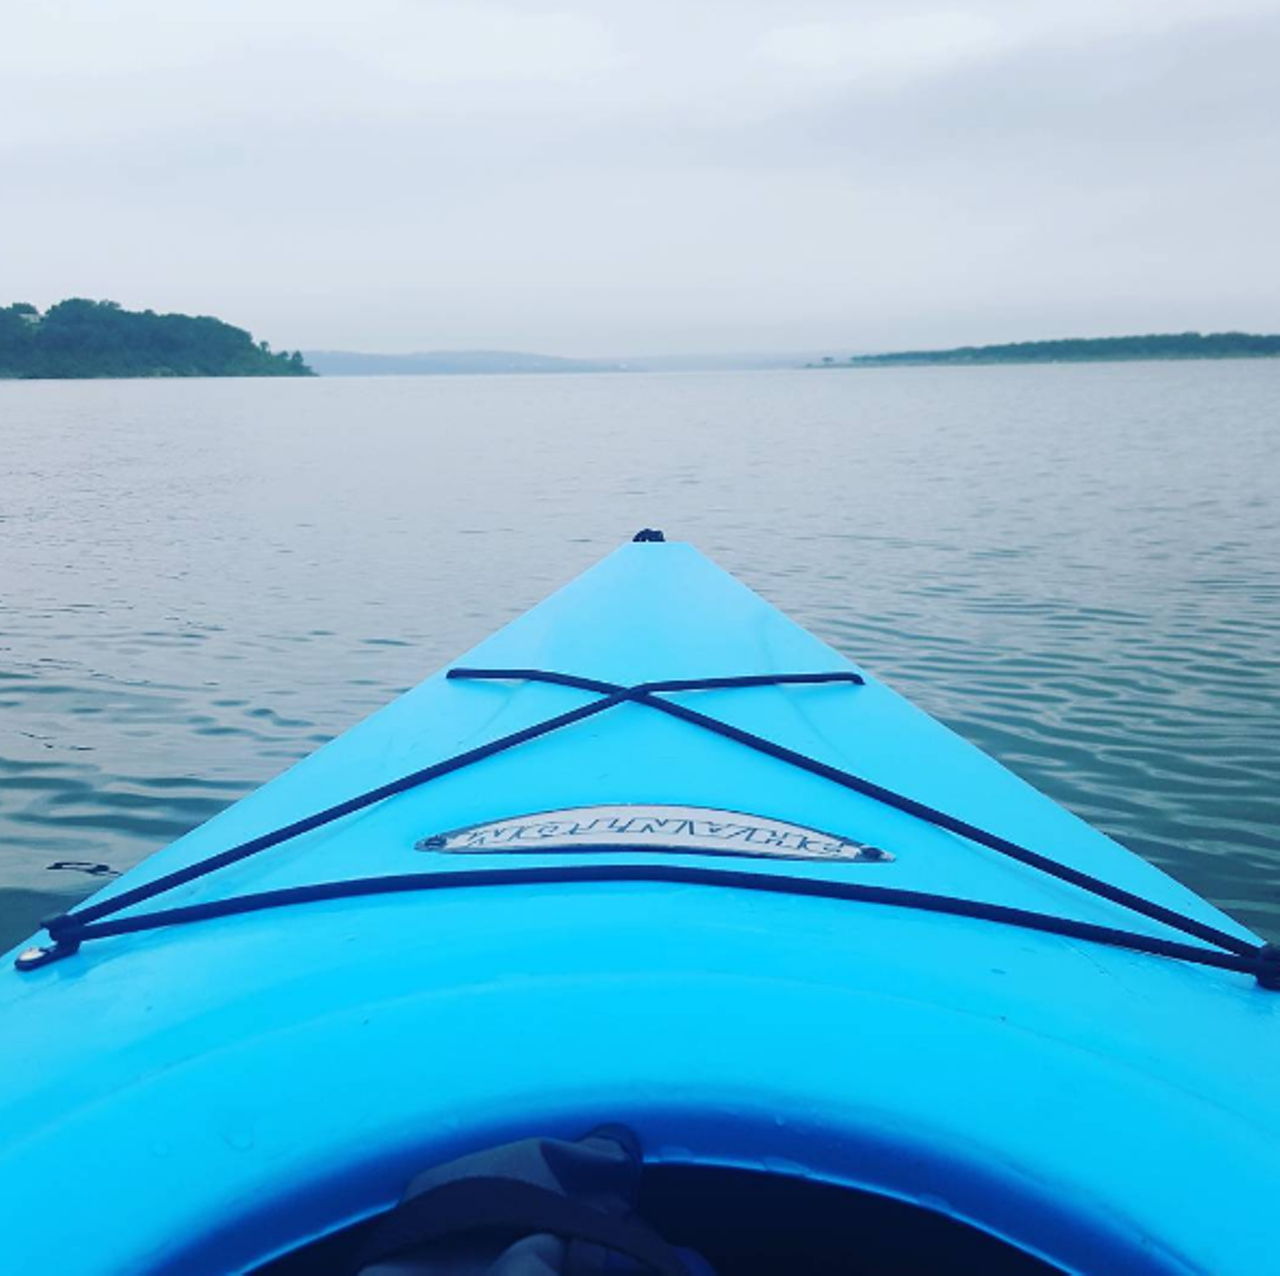 Canyon Lake
Only an hour away, make a day trip to Canyon Lake for some good times on the water and easy kayaking. Photo Instagram (skyler2891)